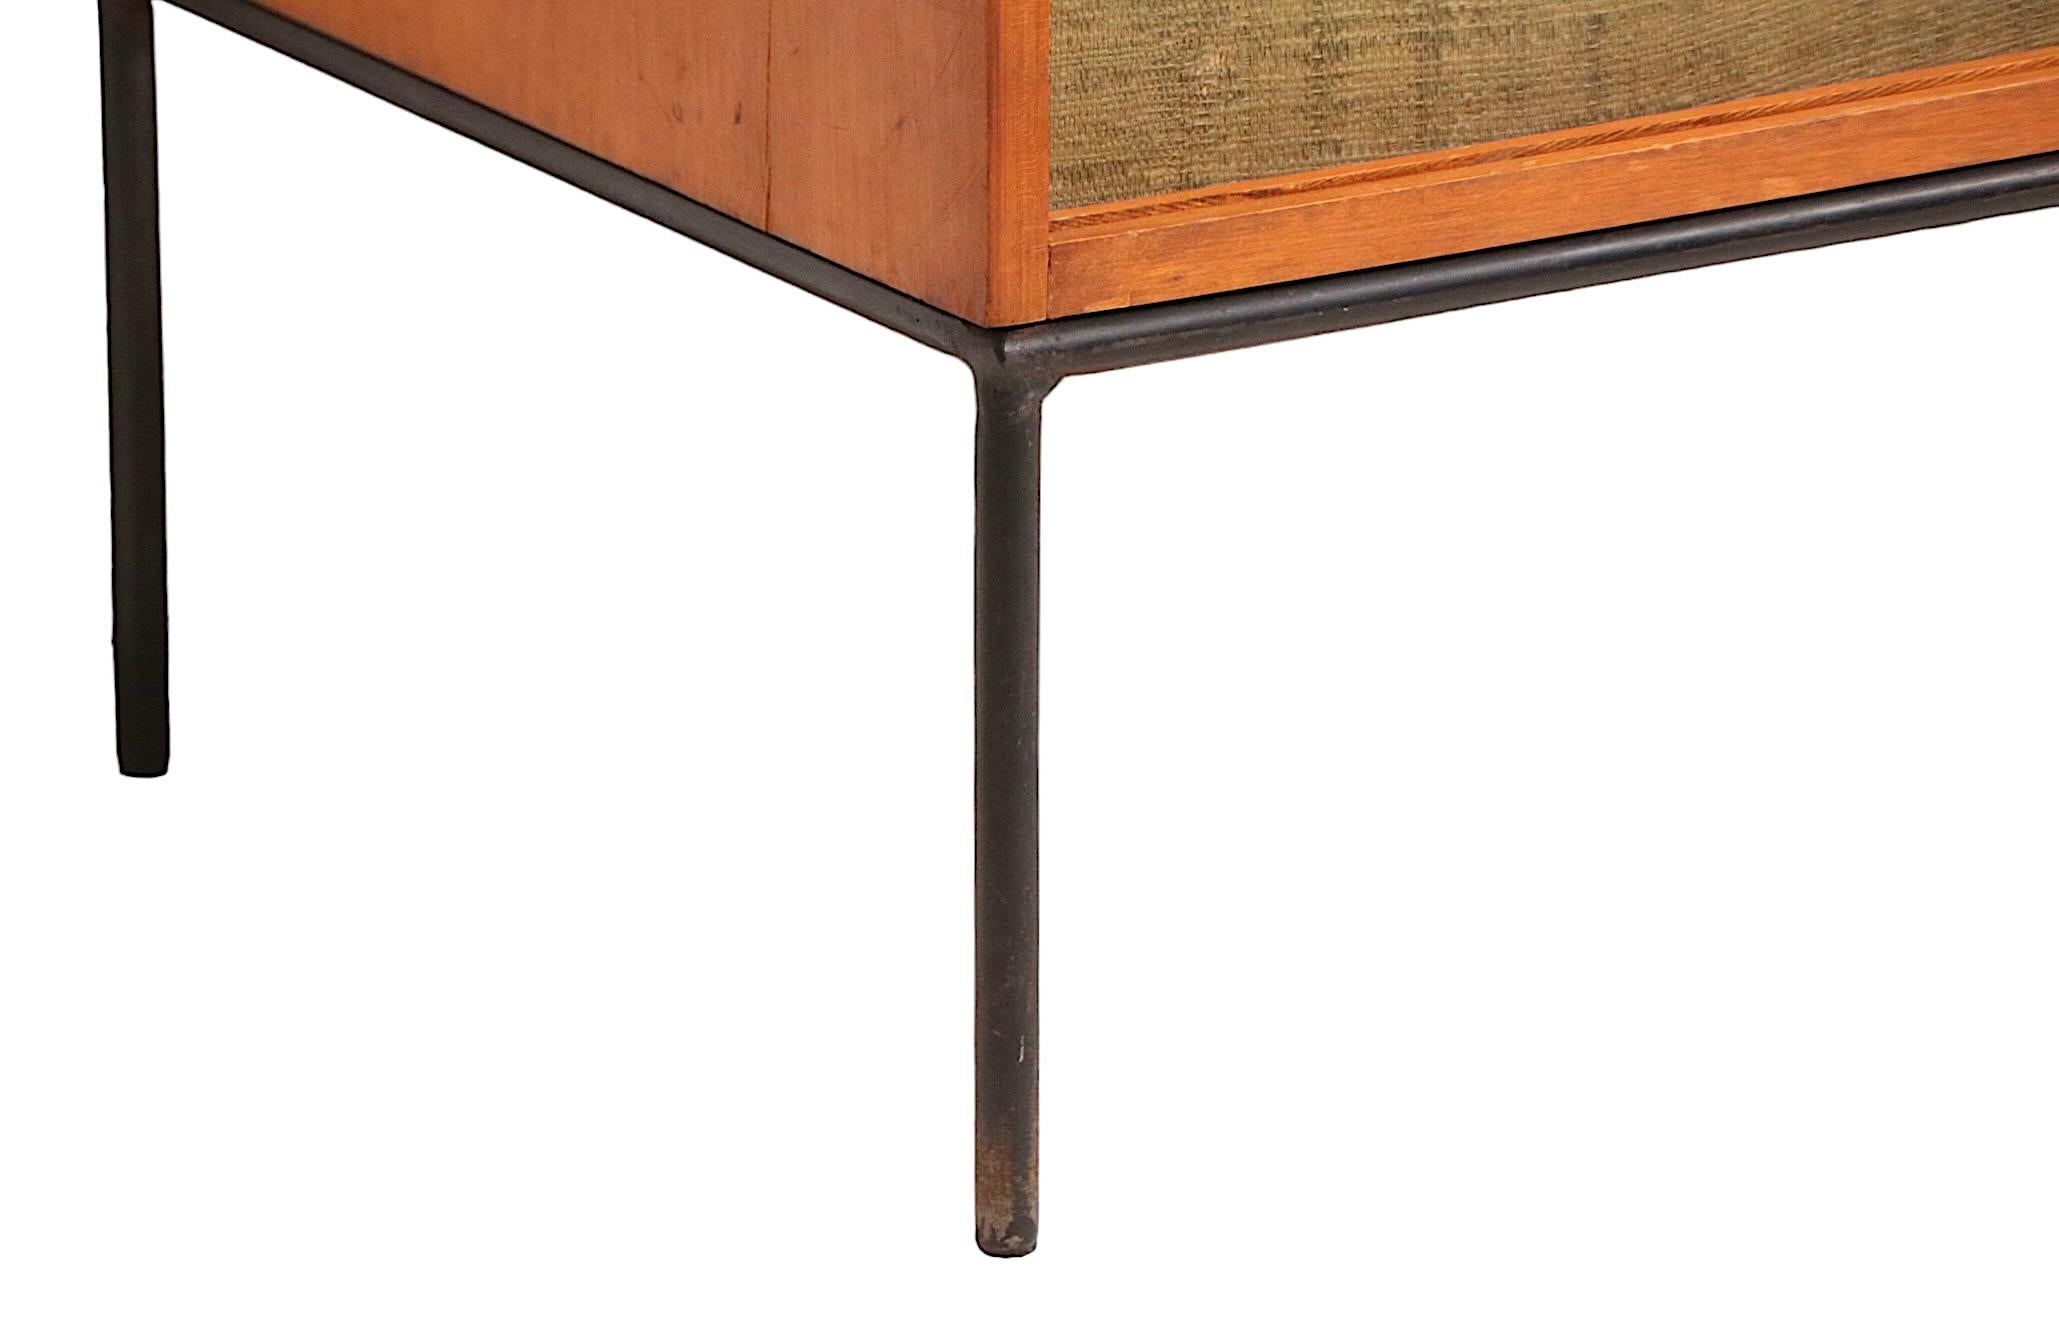  Mid Century Paul McCobb Winchendon  Planner Group Cabinet c. 1950's  In Good Condition For Sale In New York, NY